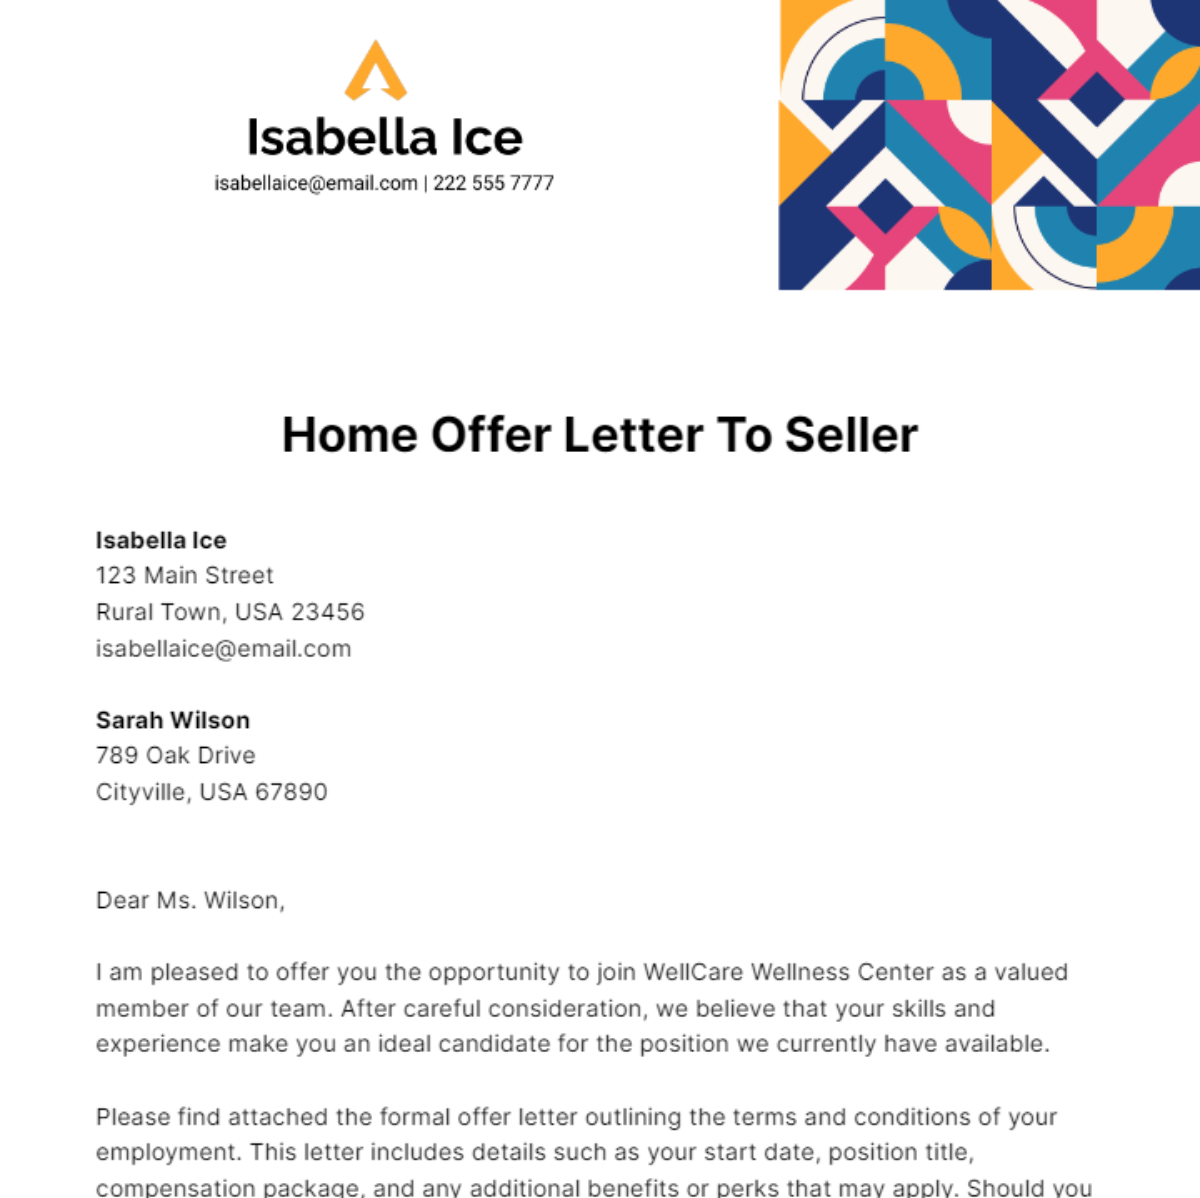 Home Offer Letter To Seller Template